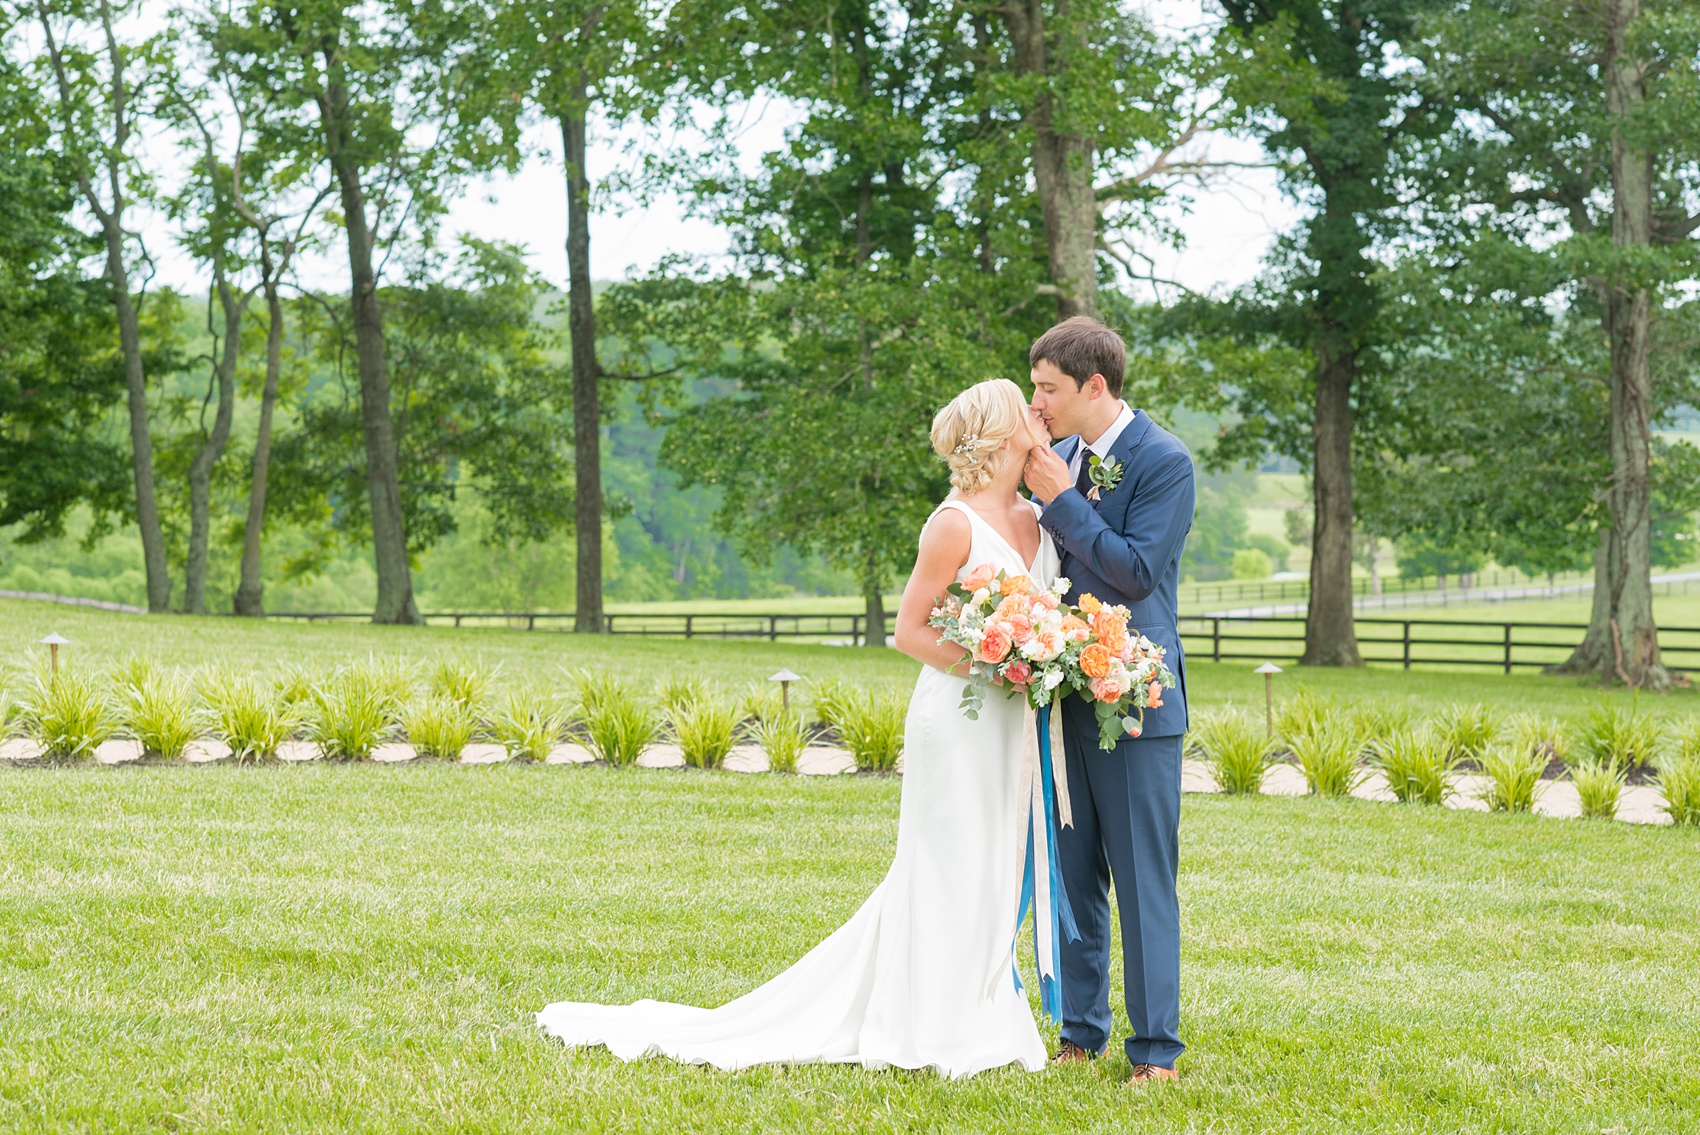 Charlottesville wedding photos by Mikkel Paige Photography. This Virginia venue is perfect for brides and grooms looking for a beautiful farm reception space. It’s green, romantic, and easy to dress up with flowers or keep simple! The bride wore a gorgeous, sexy back cowl neck silk gown by Suzanne Neville and wore her hair in an up-do. The groom wore a navy blue suit and tie and wore a succulent and eucalyptus boutonnière. The bride’s colorful rose, peony and ranunculus bouquet was also dotted with succulents and tied with silk ribbons. Click through for the complete post from this May event at the Lodge at Mount Ida Farm! Planning and design by @vivalevent. #Charlottesville #mountidafarm #lodgeatmountida #CharlottesvilleVA #CharlottesvilleVirginia #Charlottesvillewedding #Charlottesvilleweddingphotographer #mikkelpaige #Vivalevent #brideandgroom #navybluesuit #sexybackweddinggown #backlessweddinggown #suzanneneville #TraditionsbyAnna #WinkHairandMakeup